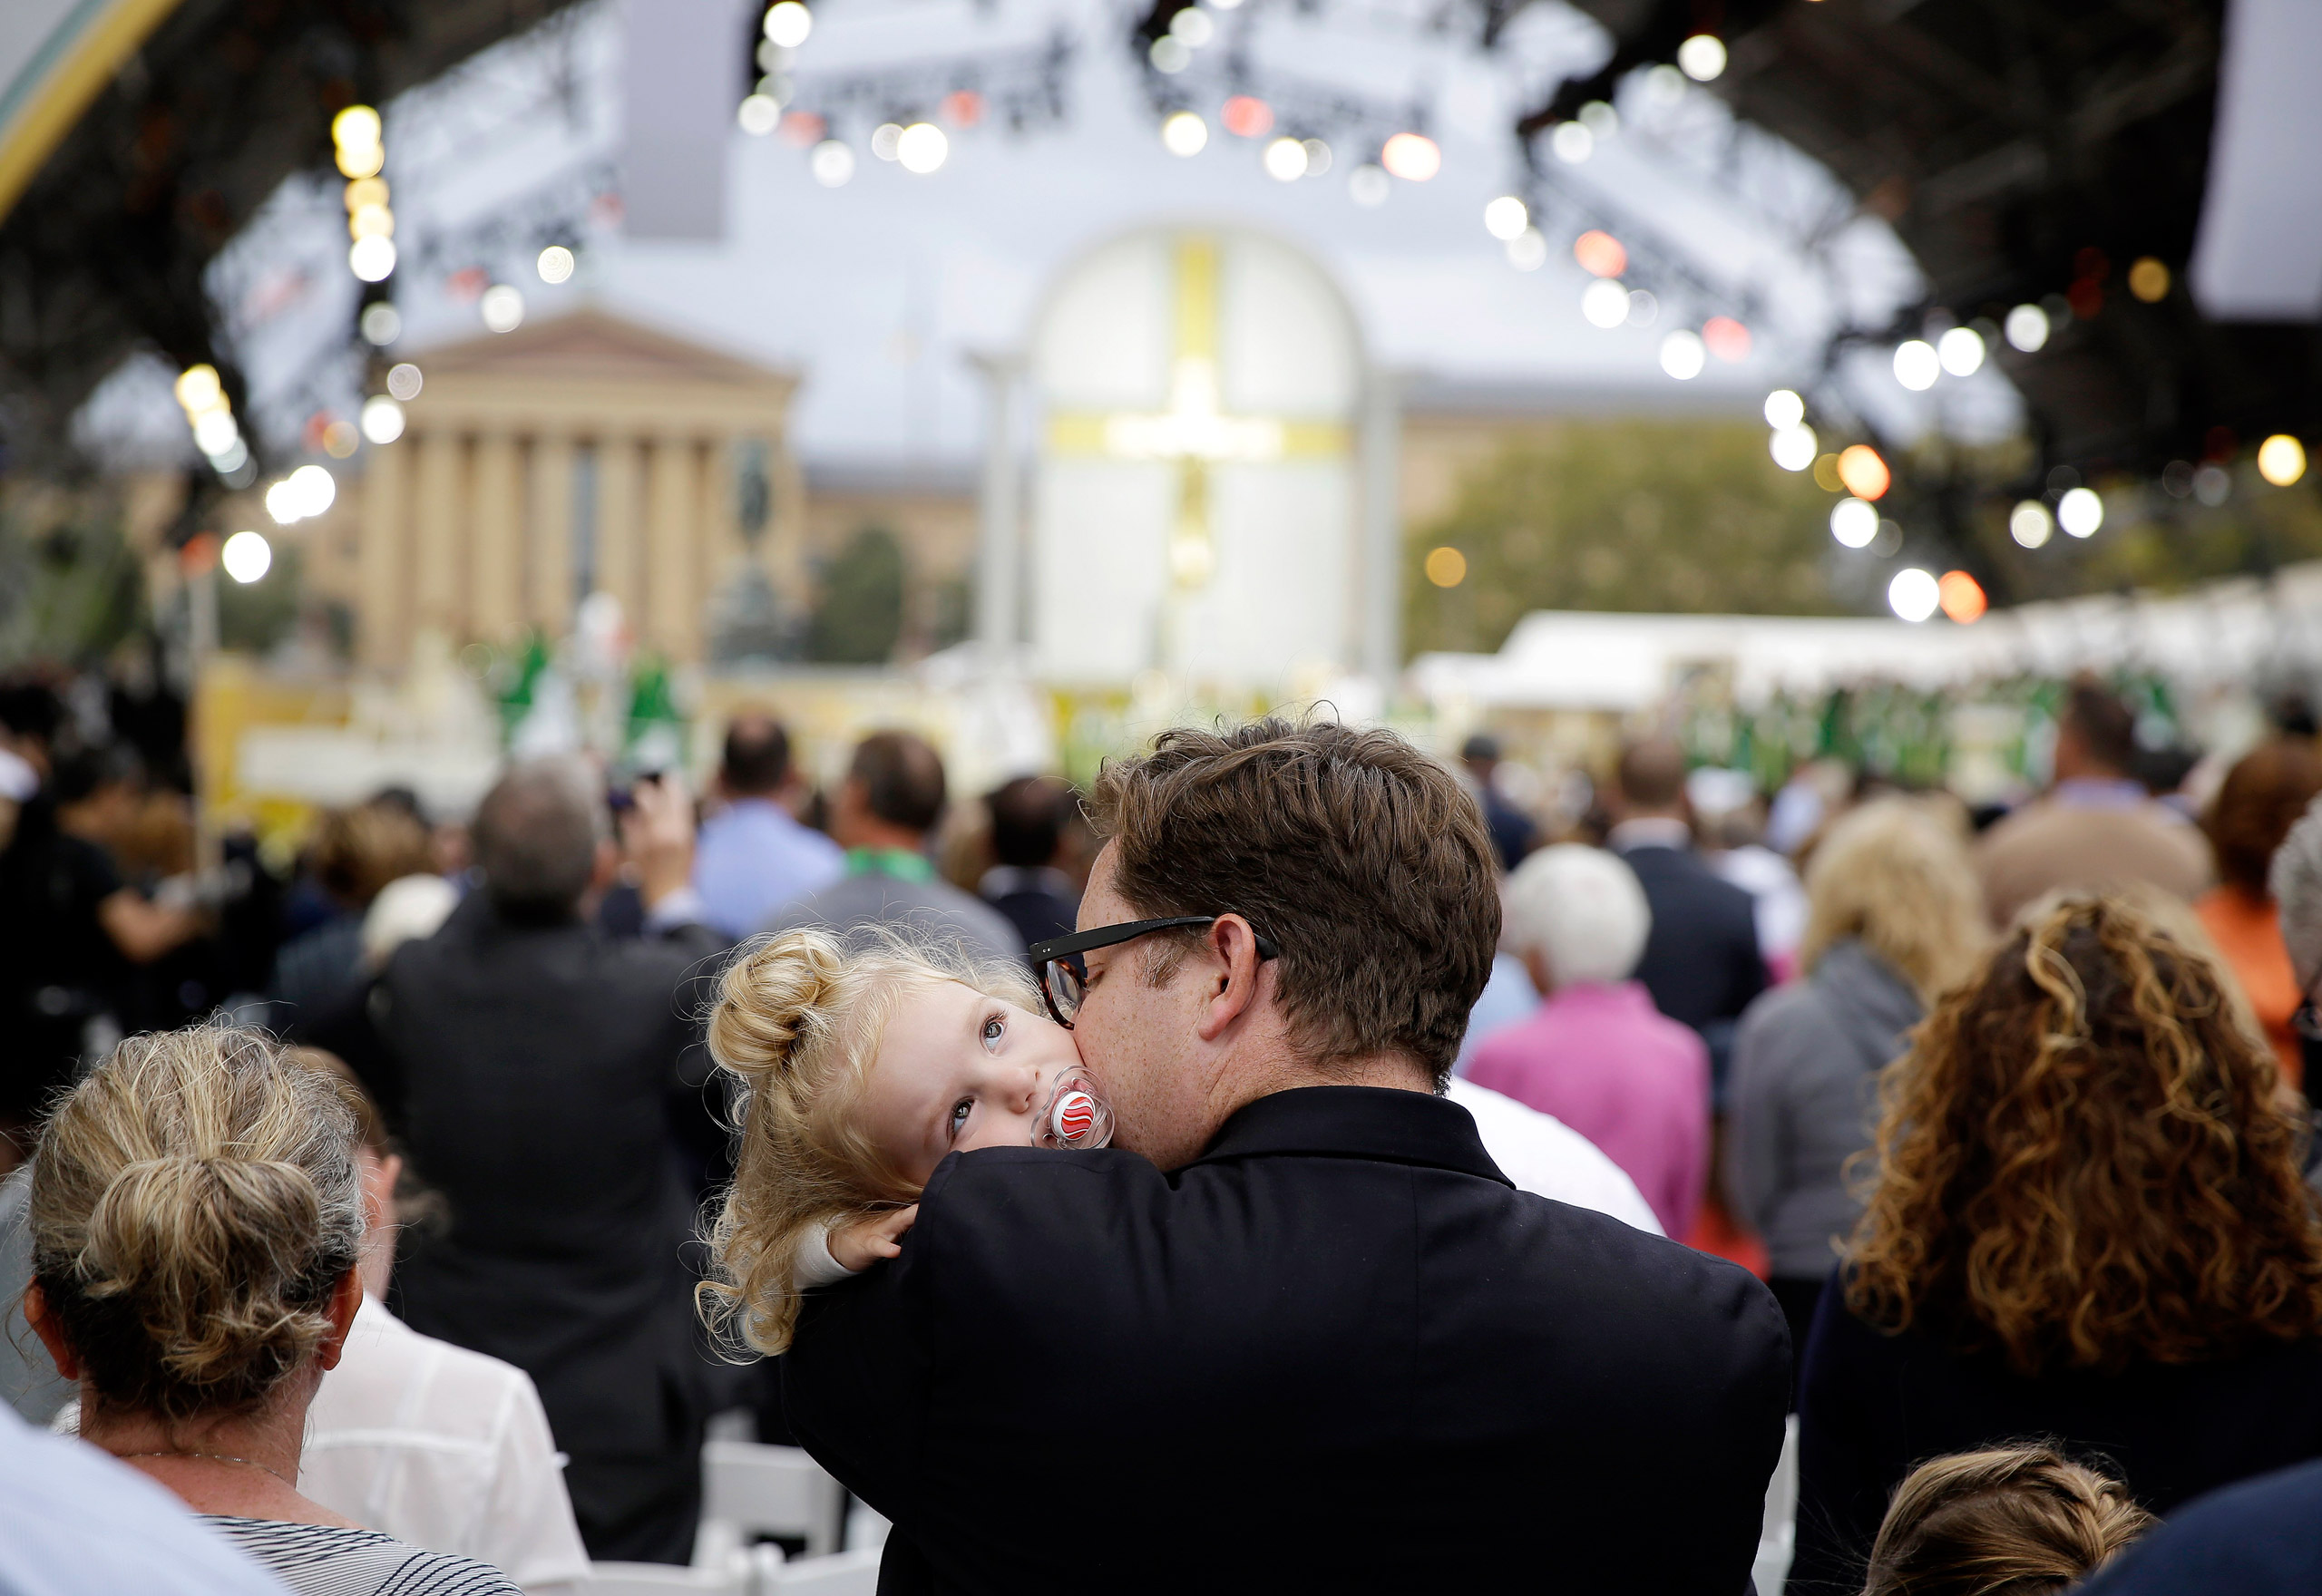 A man holds a child as Pope Francis celebrates mass in Philadelphia on Sept. 27, 2015.